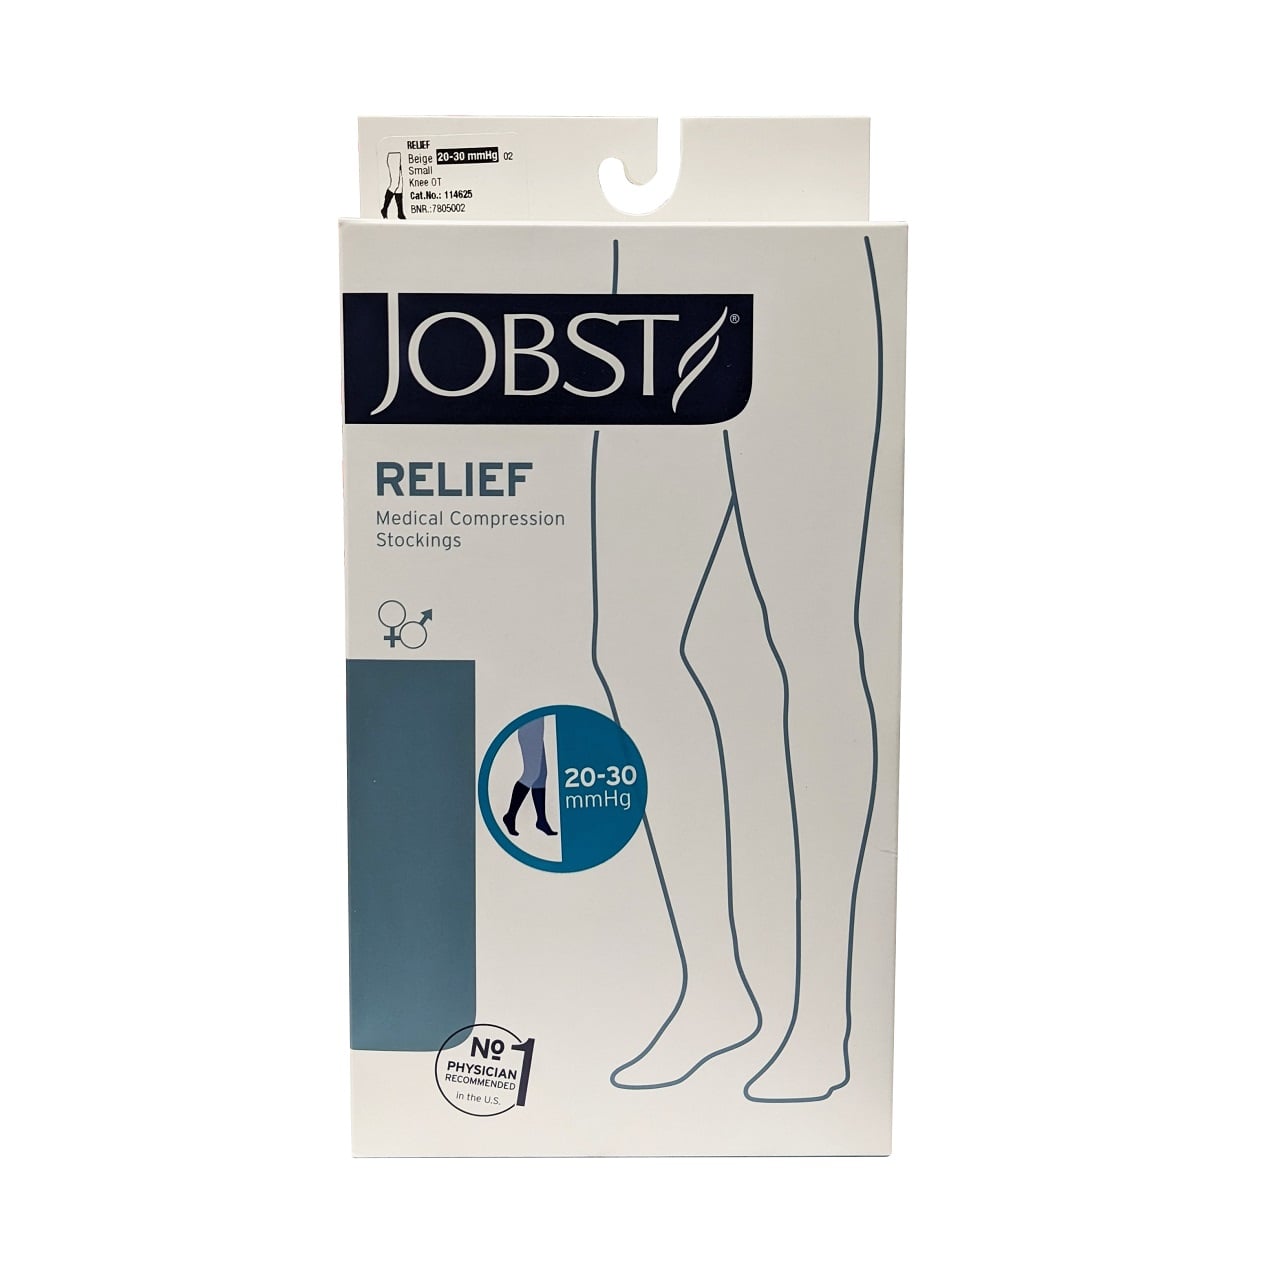 Jobst Relief Compression Stockings 20-30 mmHg - Knee High / Open Toe / –   (by 99 Pharmacy)